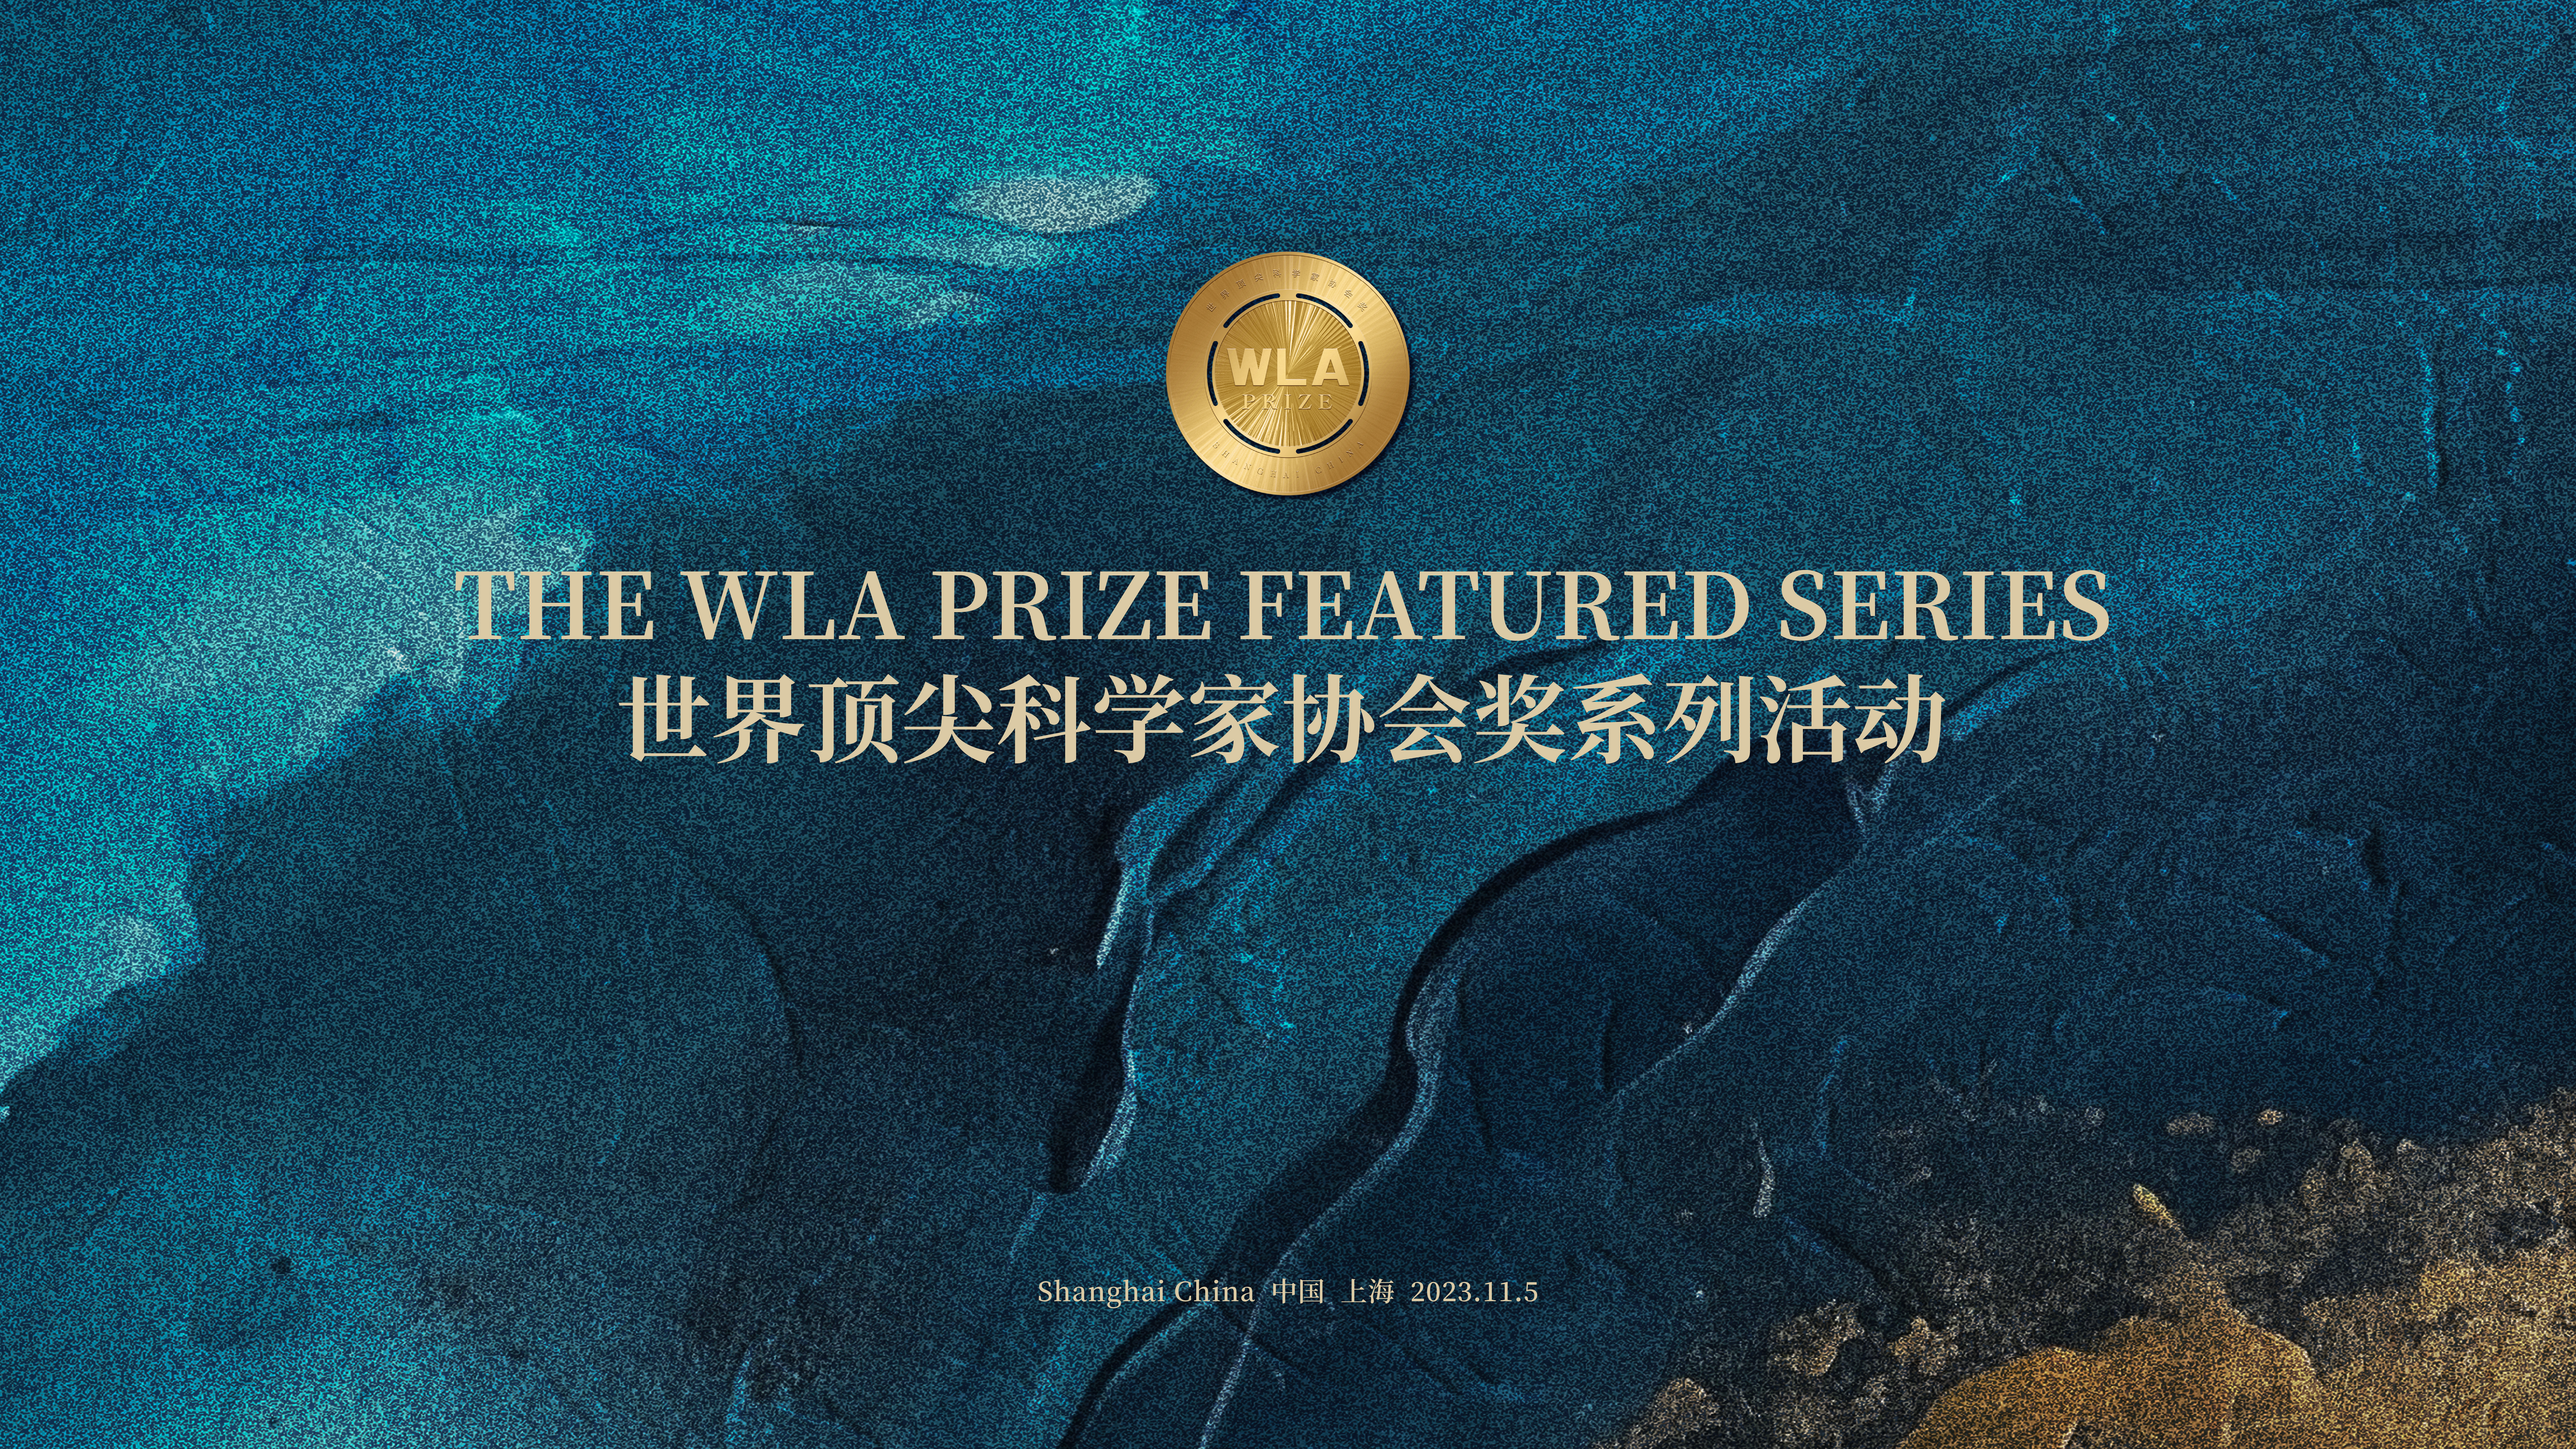 The 2023 WLA Prize Laureates Featured Series